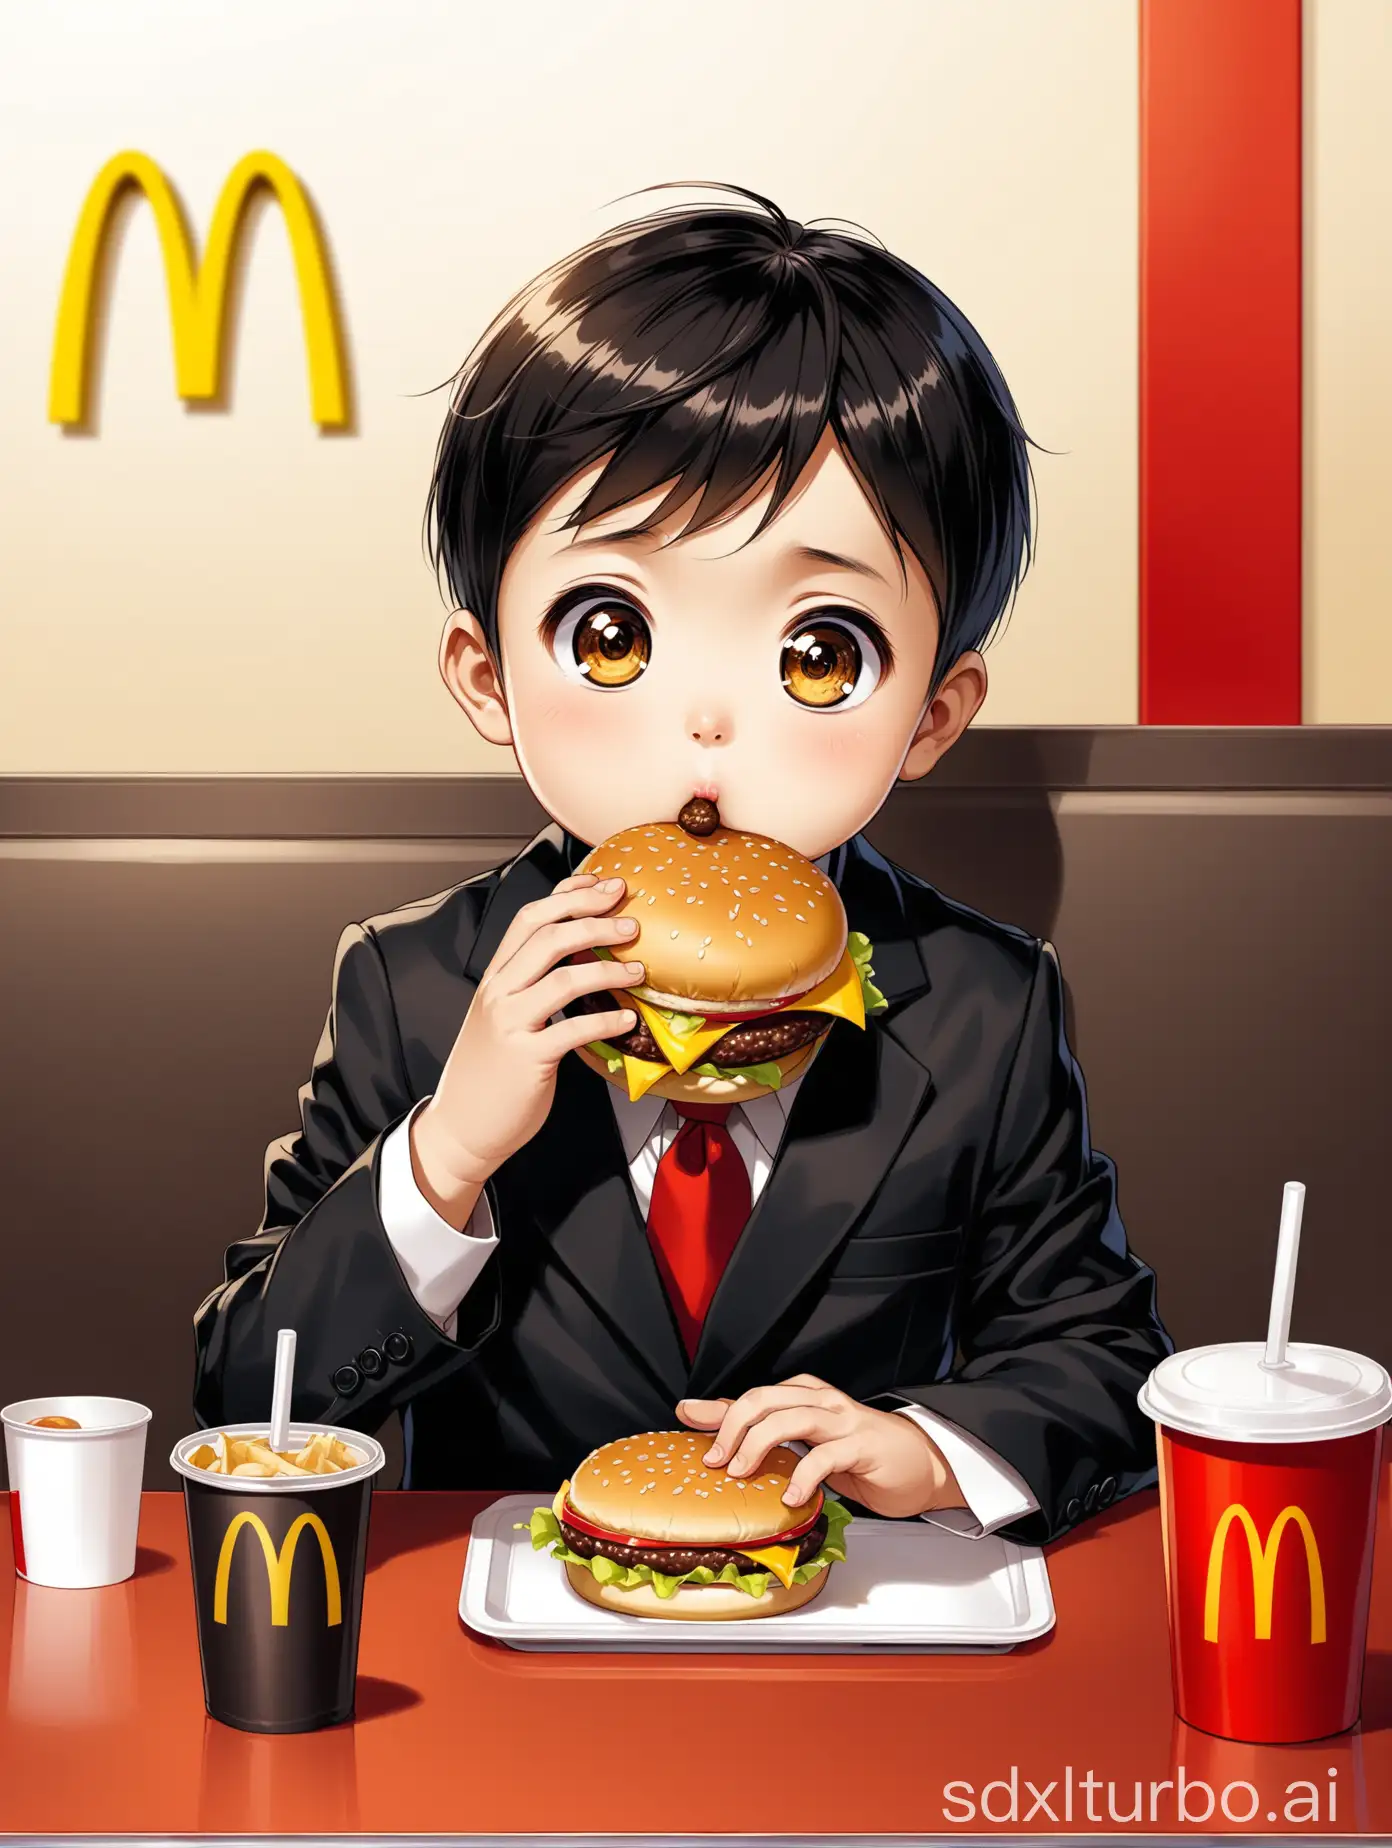 A 7-year-old Chinese boy, with big eyes, wearing a black suit, sitting at a McDonald's table, eating a hamburger.